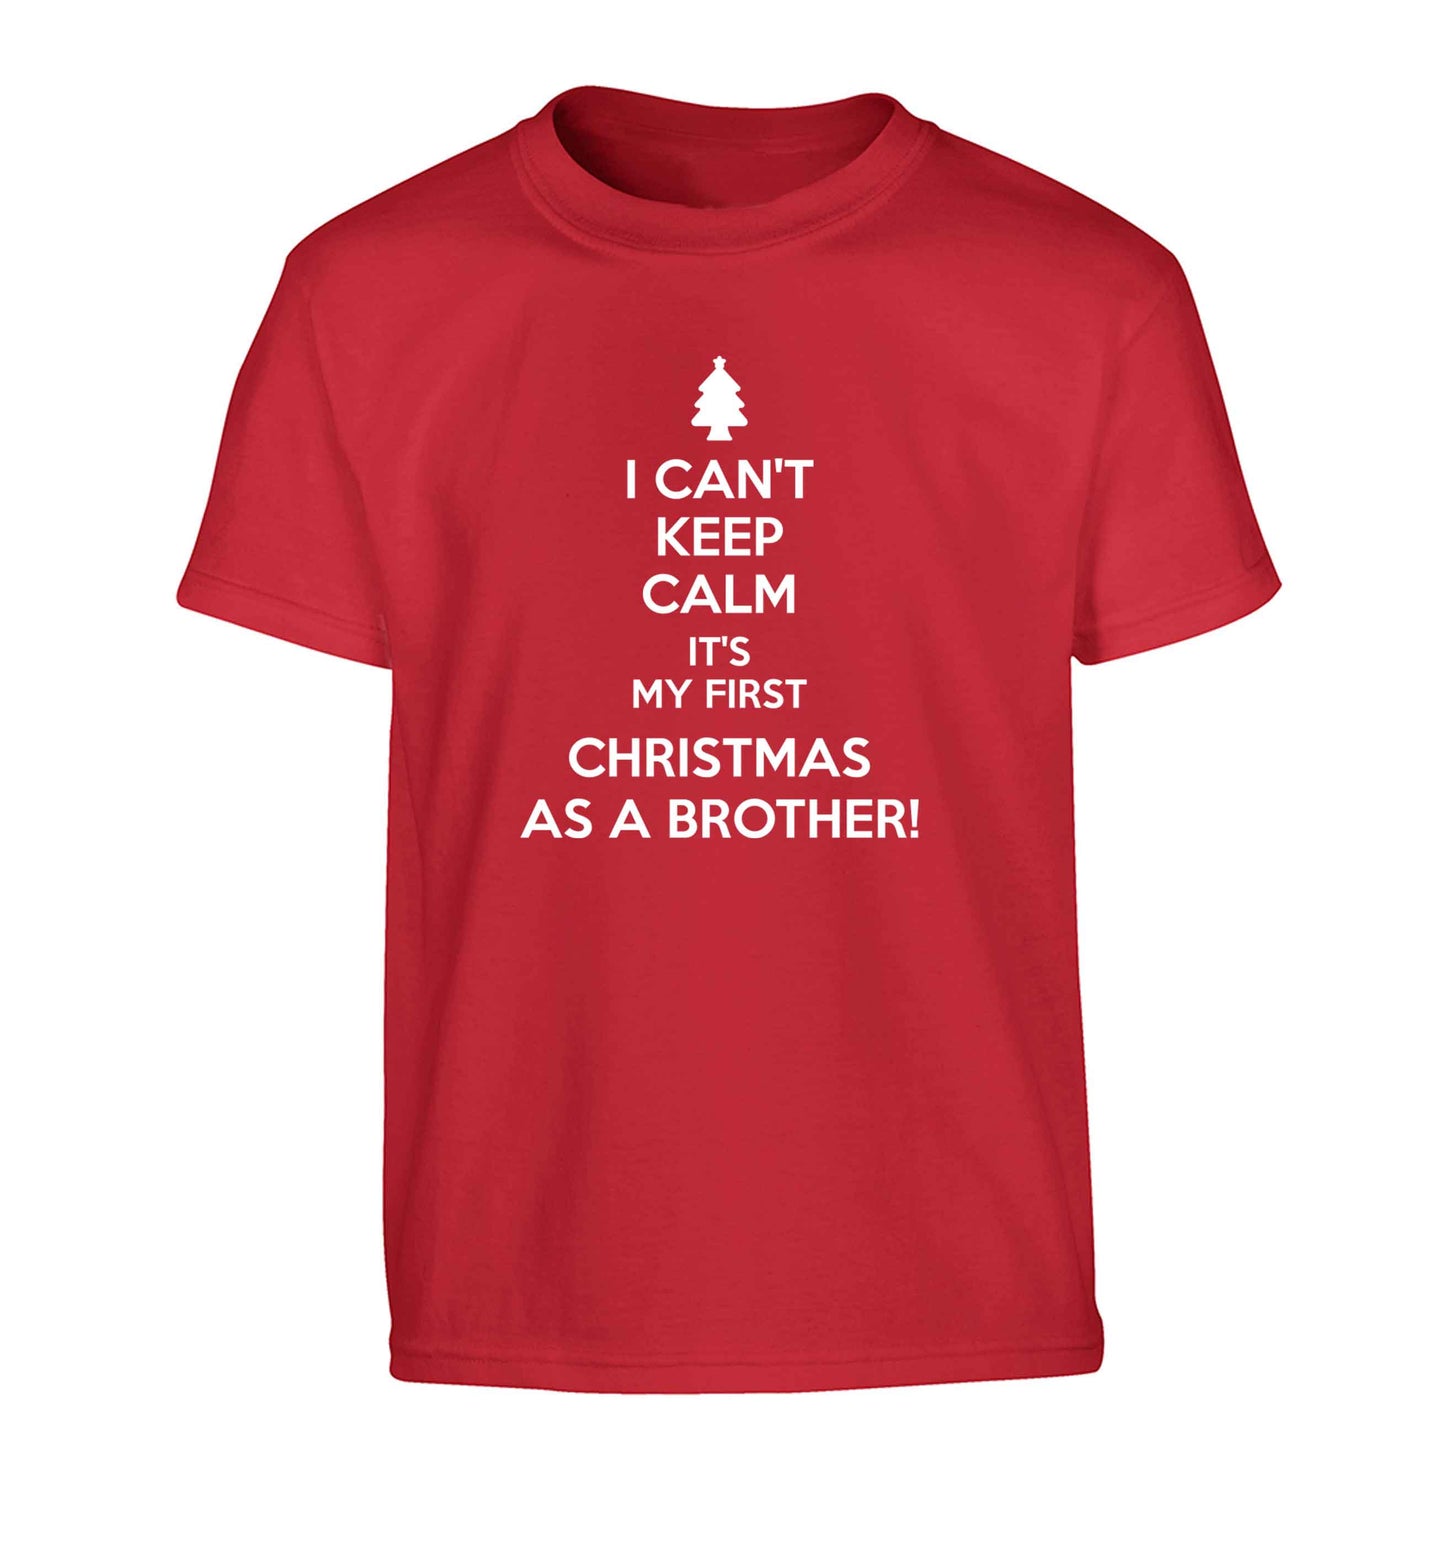 I can't keep calm it's my first Christmas as a brother! Children's red Tshirt 12-13 Years